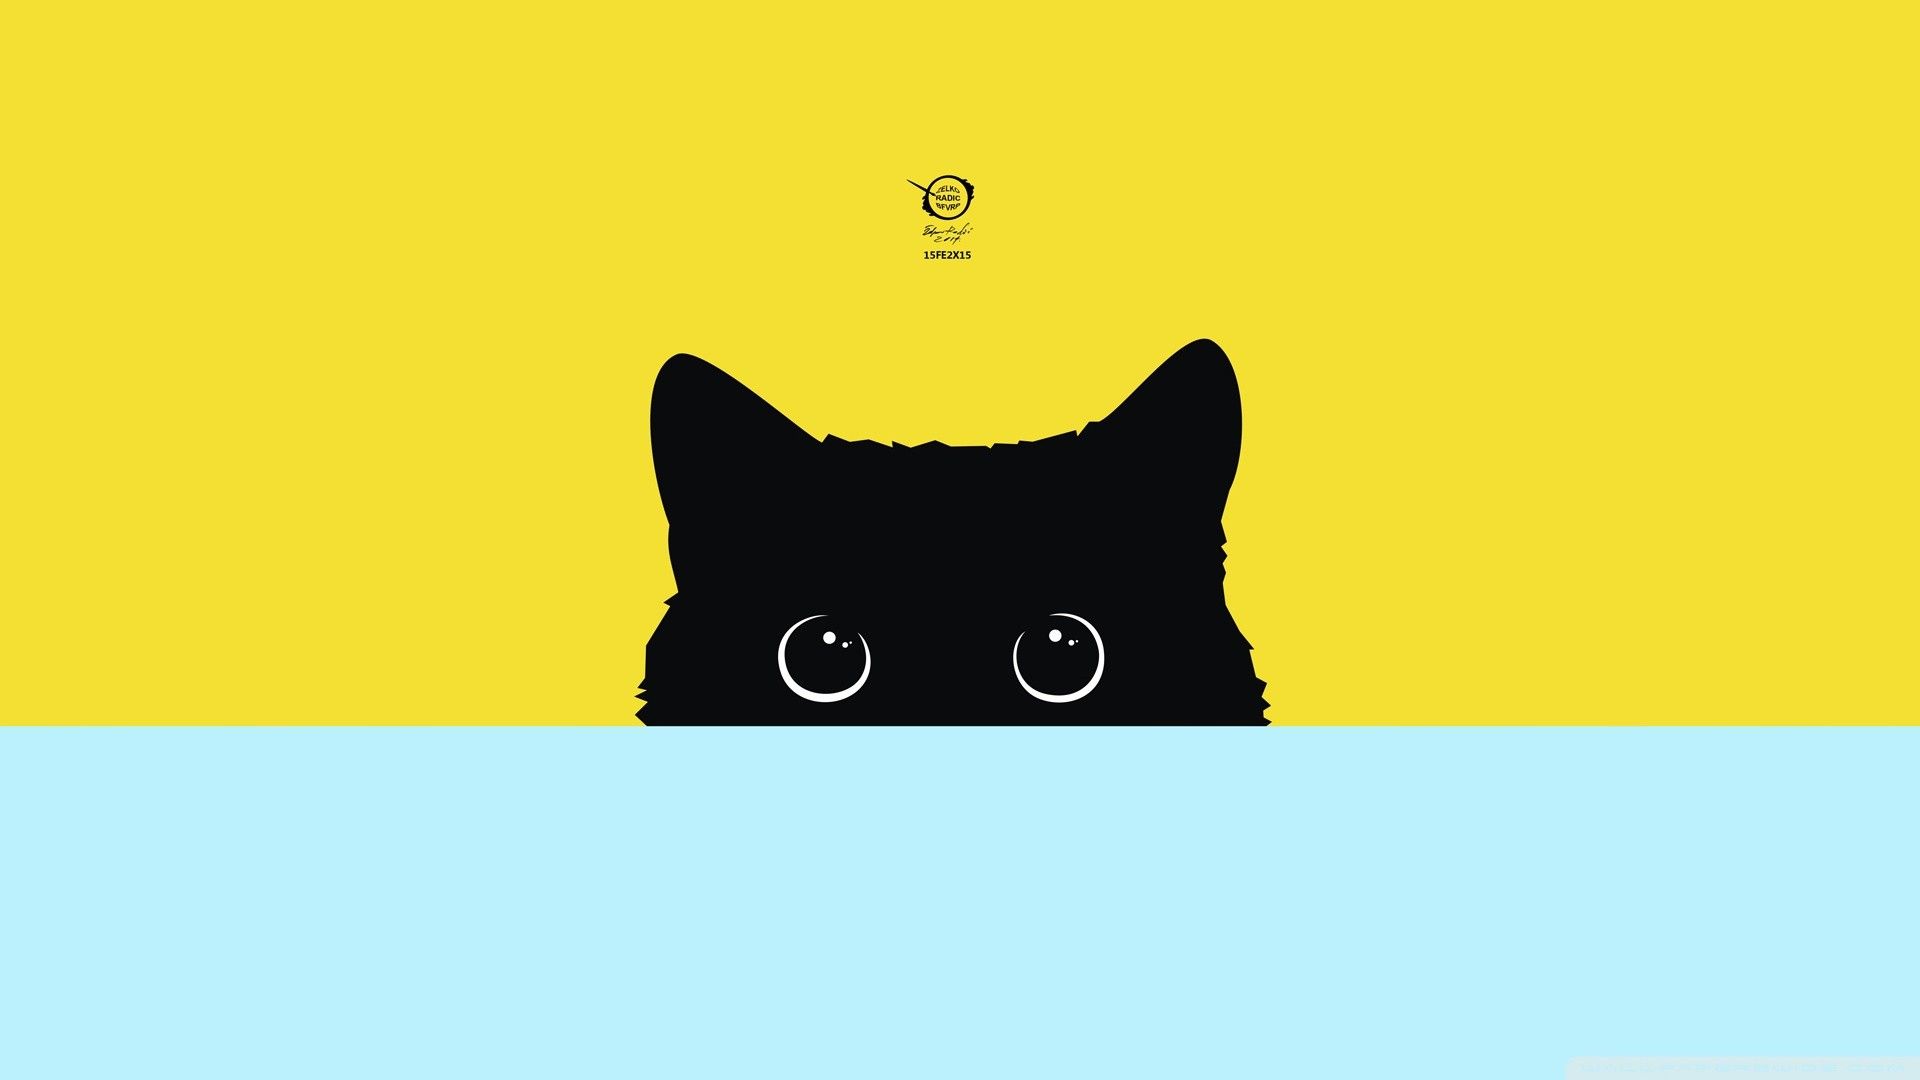 Black cat wallpaper with a blue and yellow background - Minimalist, cat